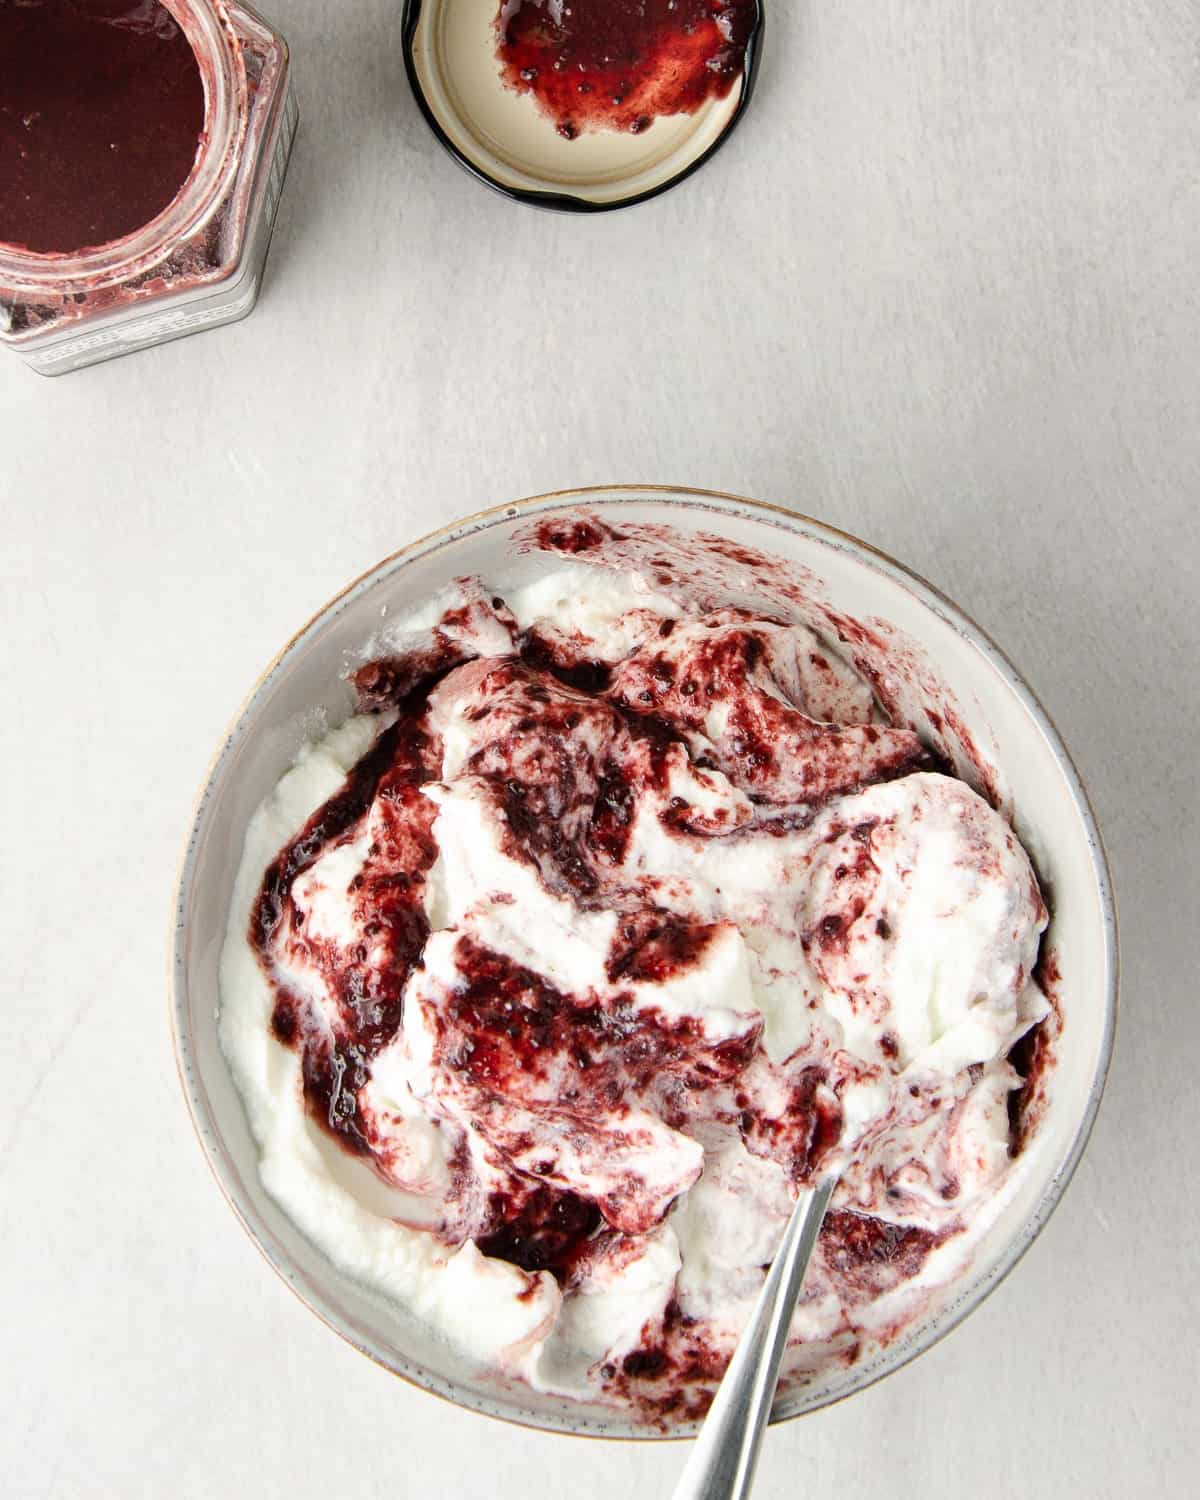 a center grey bowl of greek yogurt marbled with blackberry jam. the jam created swirls of a dark reddish color and is not fully mixed in. a jar of blackberry jam to the top left side